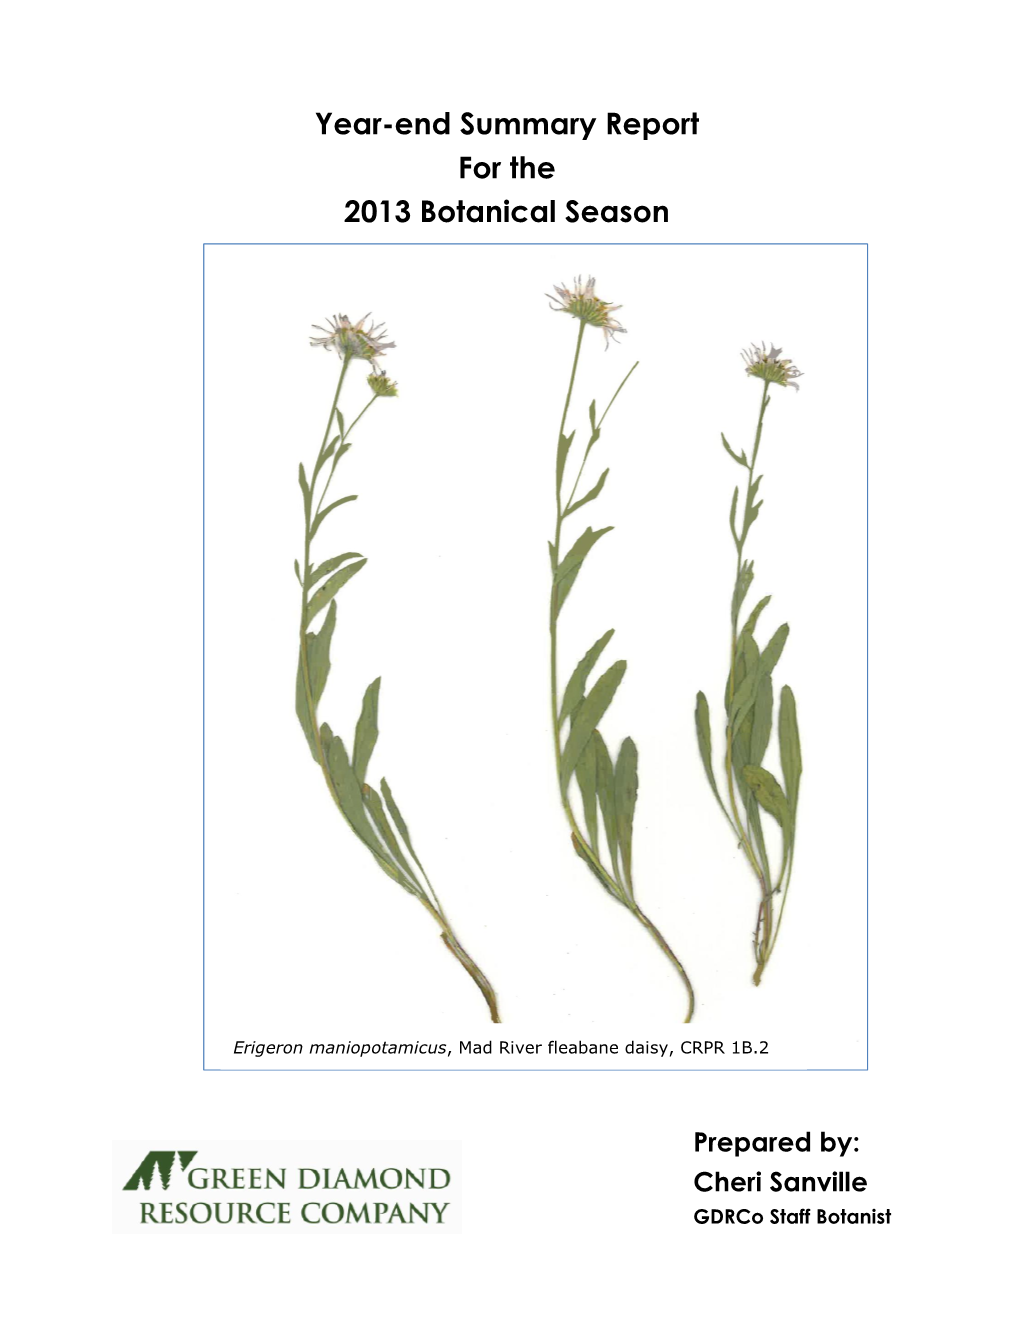 Year-End Summary Report for the 2013 Botanical Season